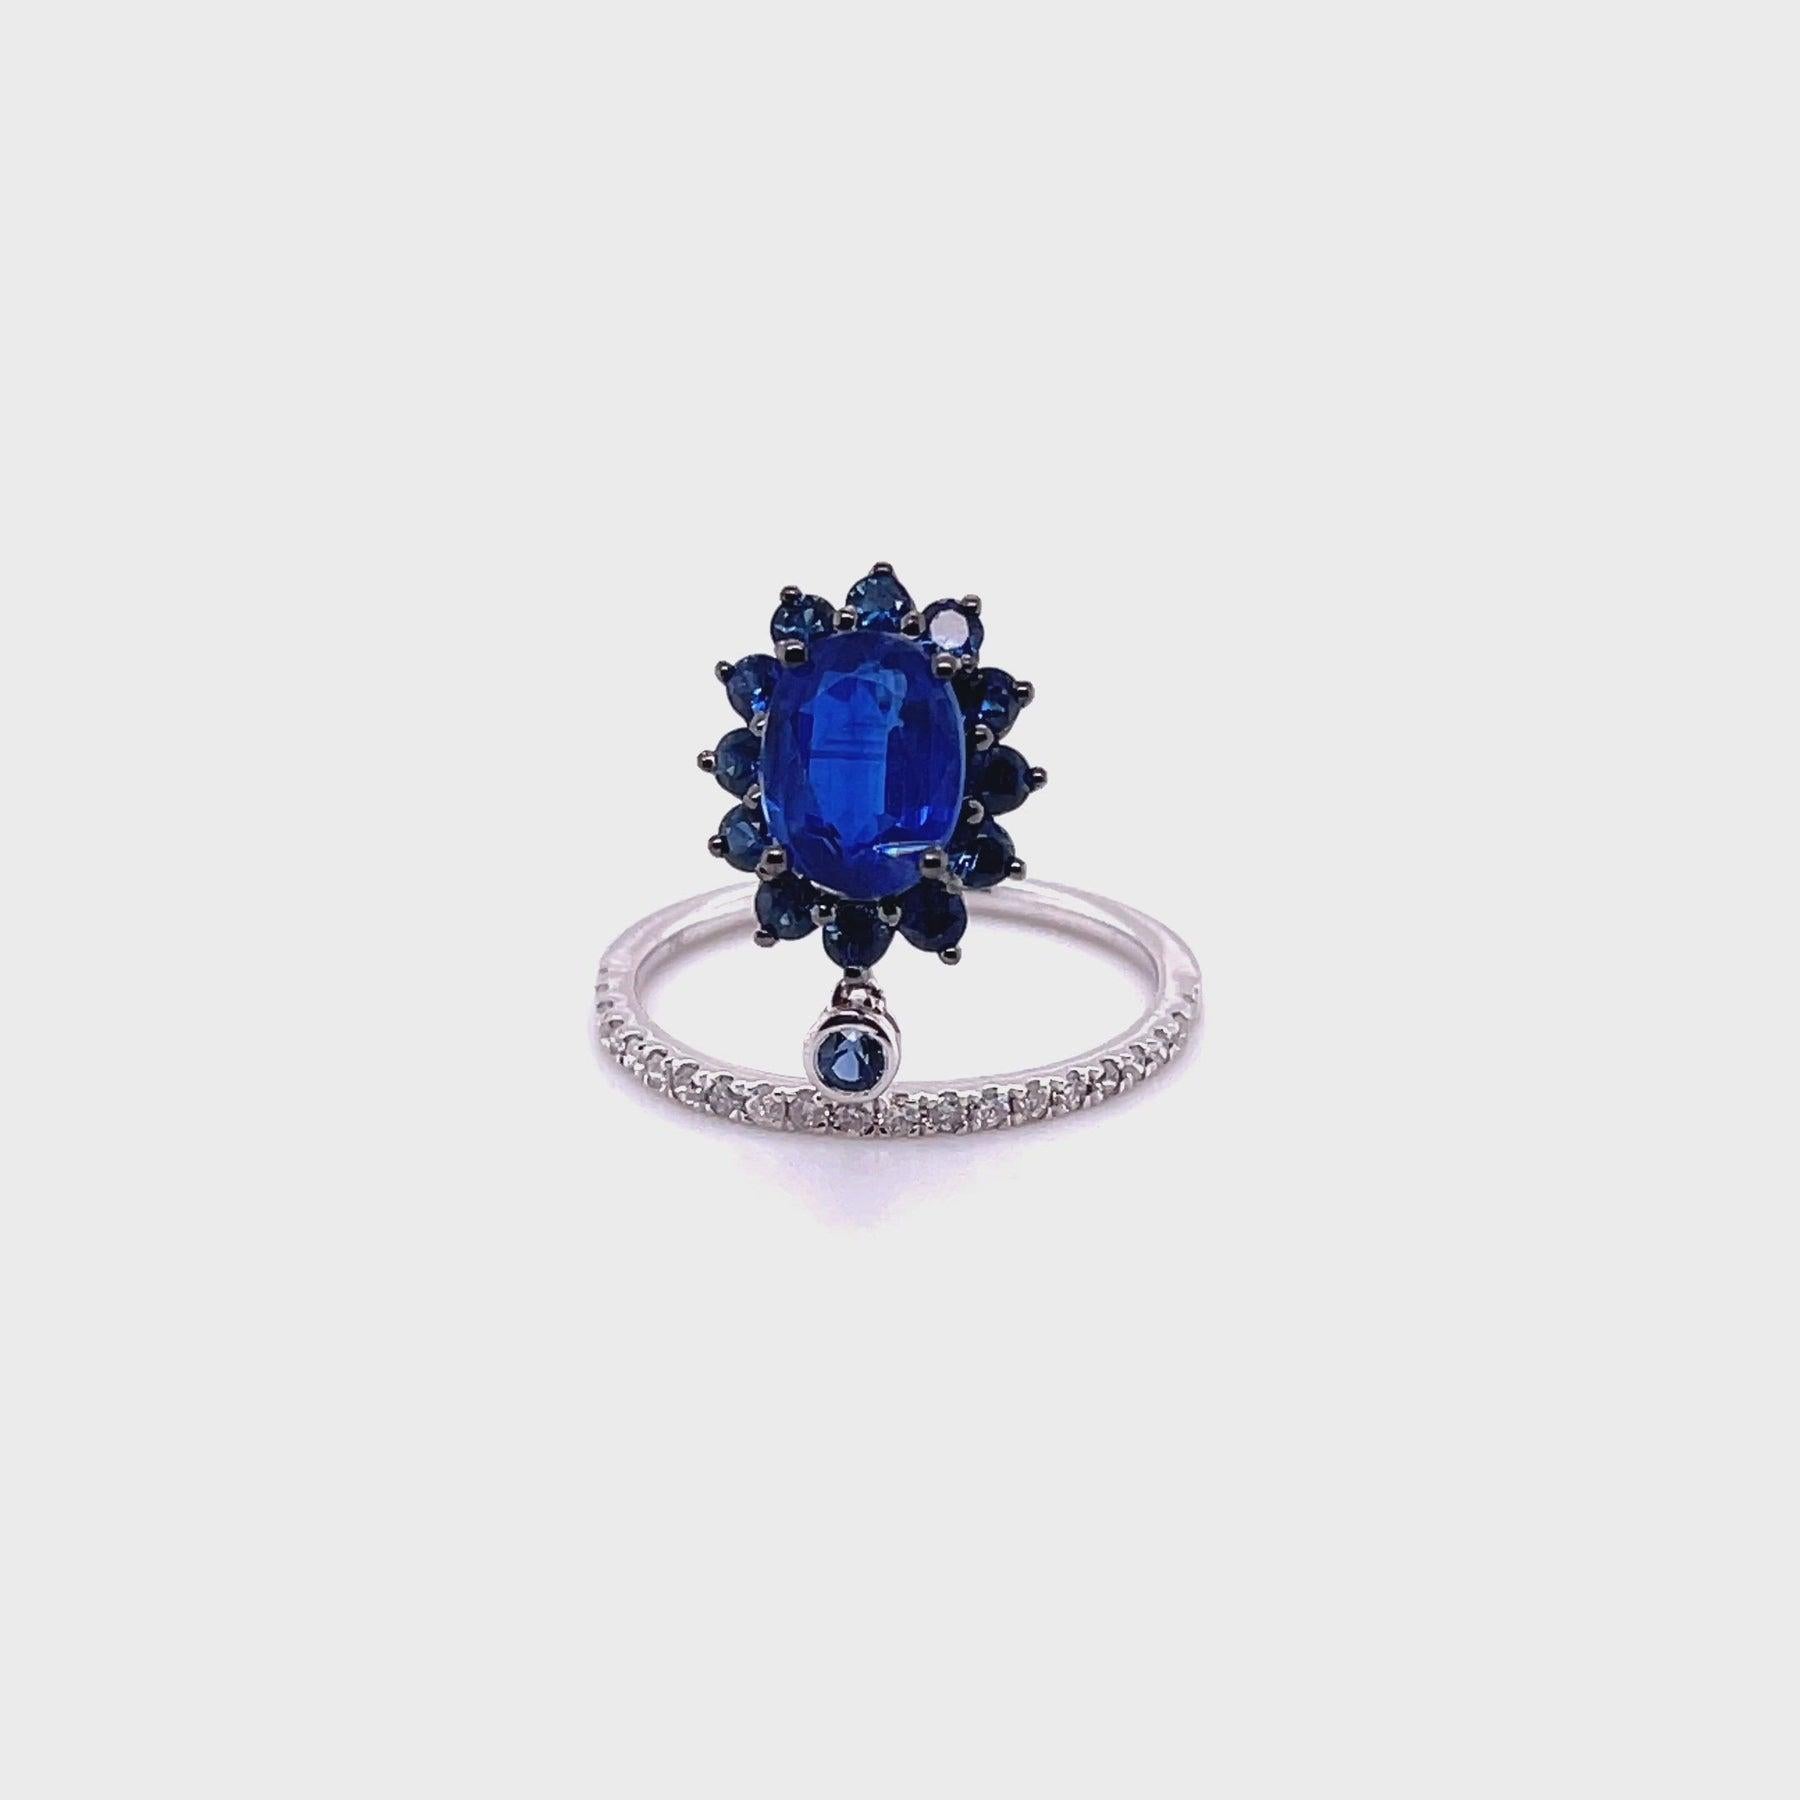 For Sale:  18ct White Gold Ring with 1.45ct Kyanite and Diamond 3